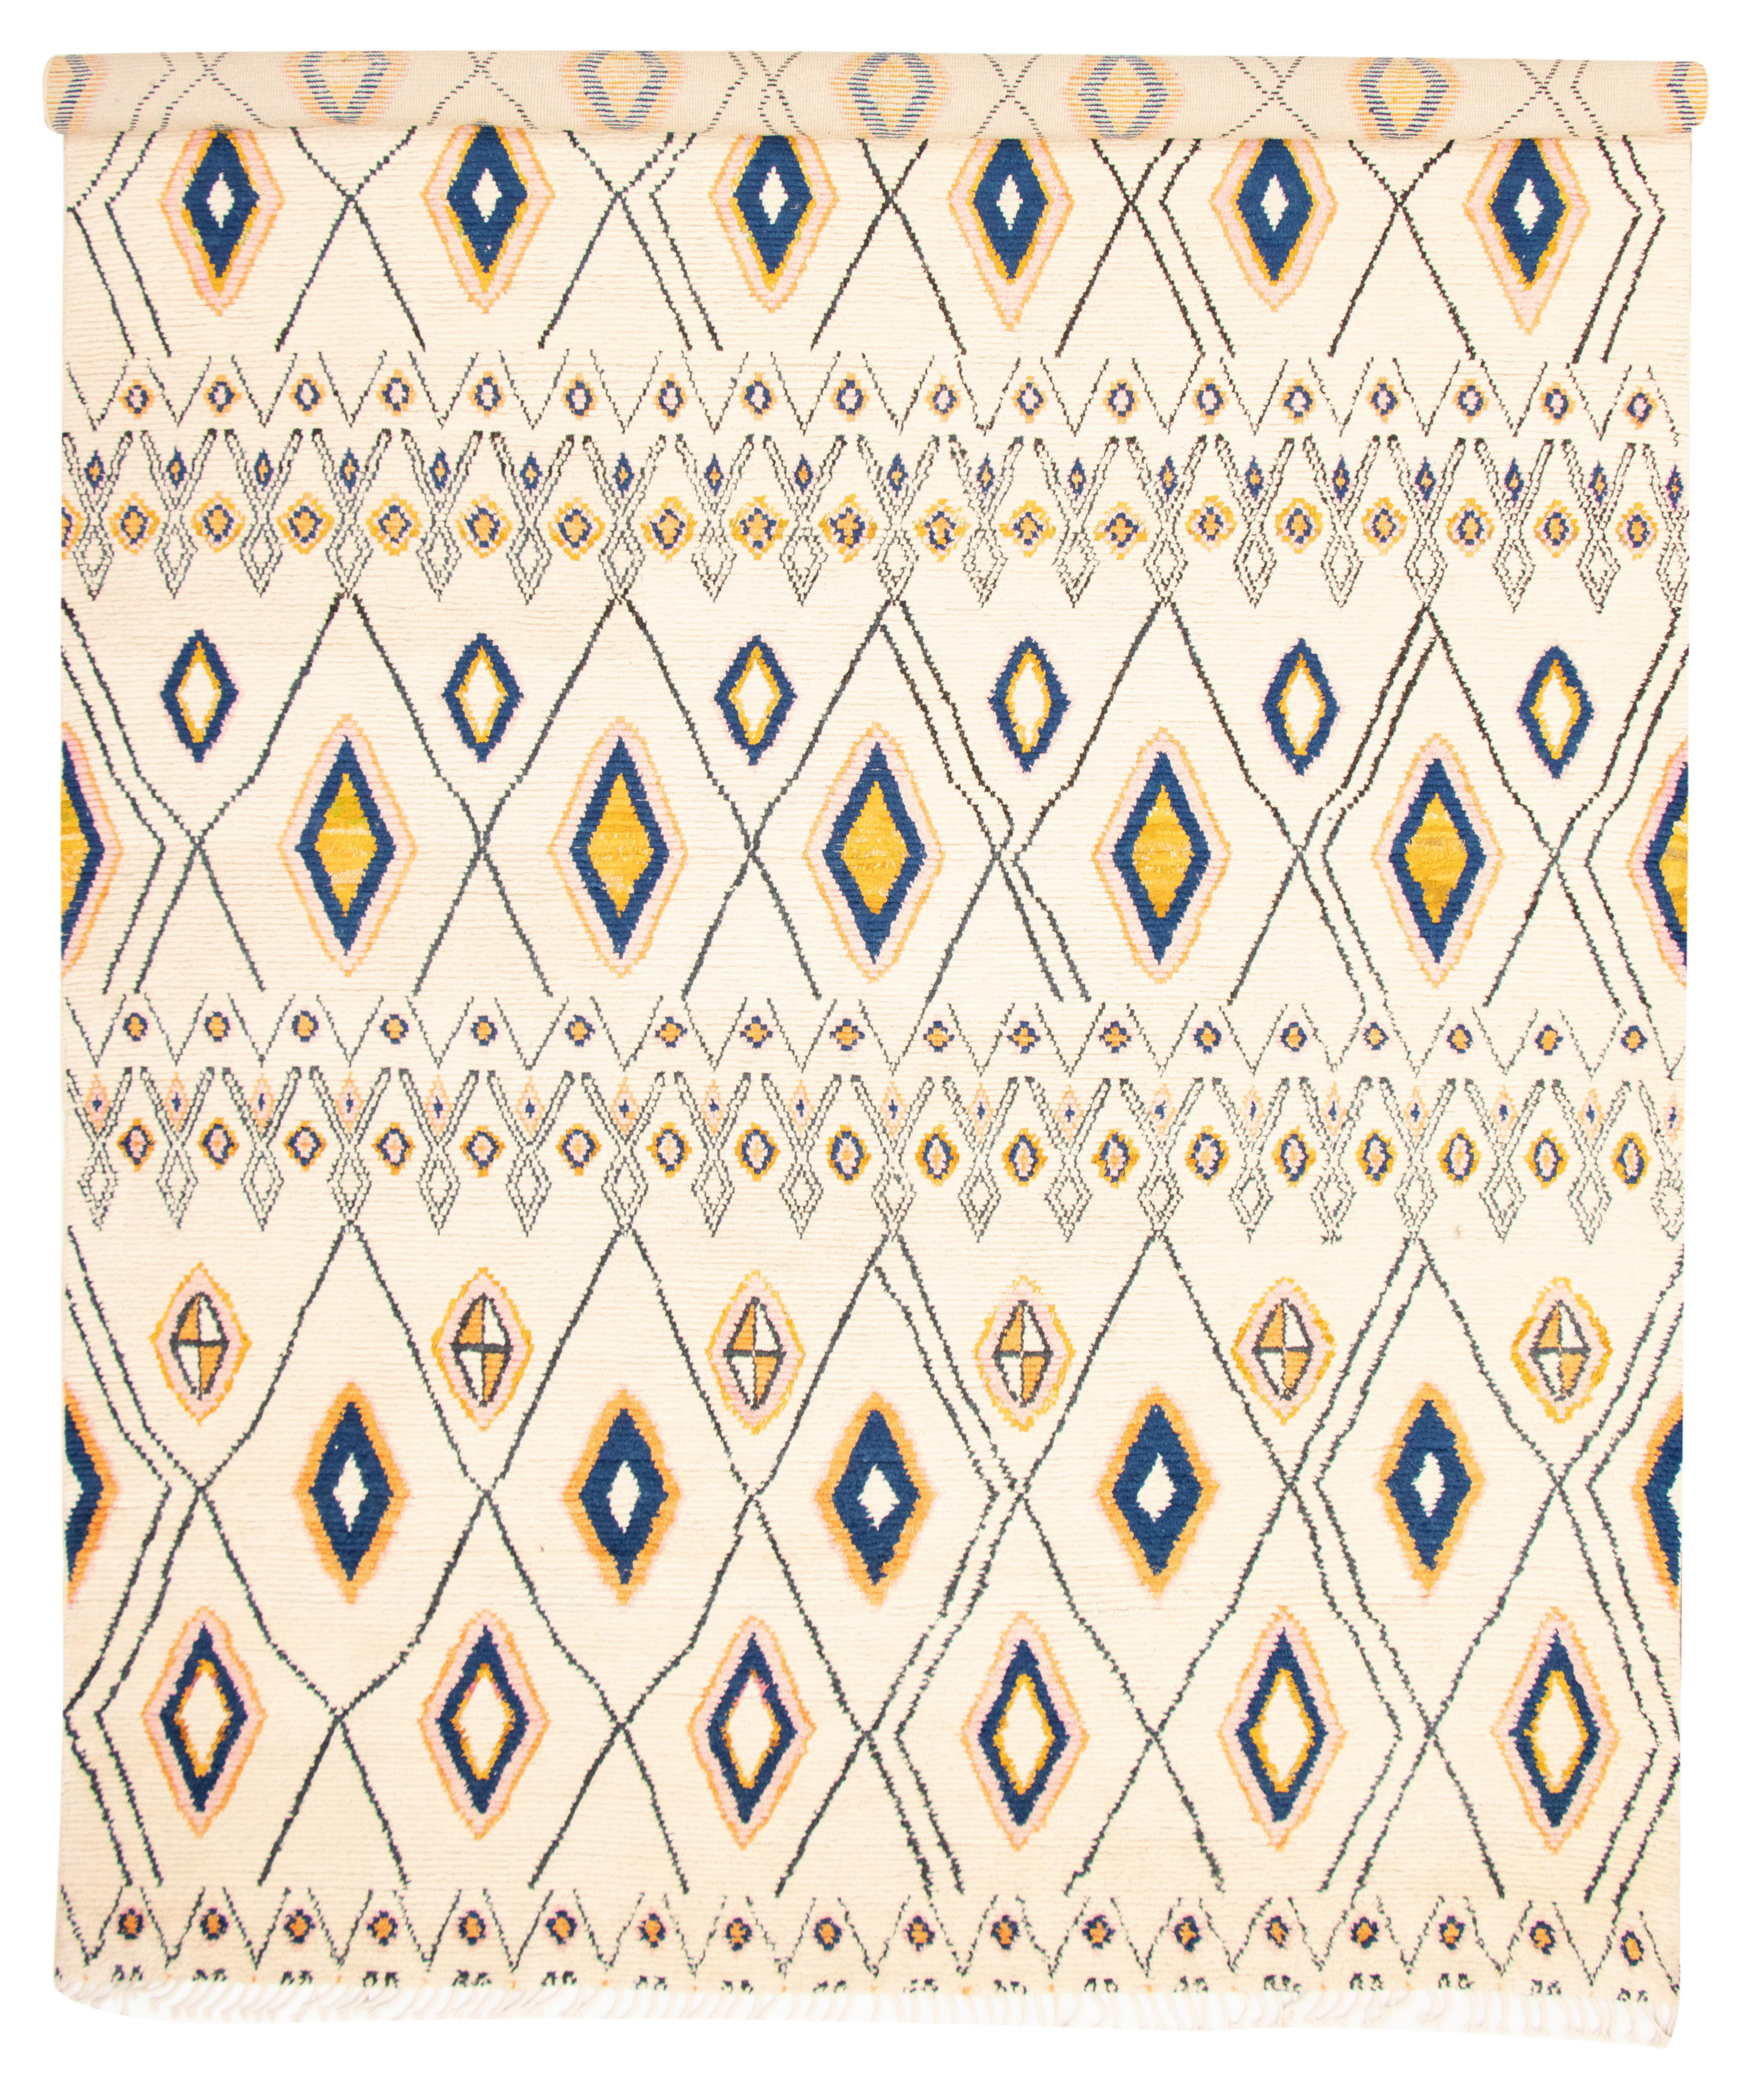 Hand-knotted Marrakech Cream Wool Rug 9'11" x 14'10" Size: 9'11" x 14'10"  